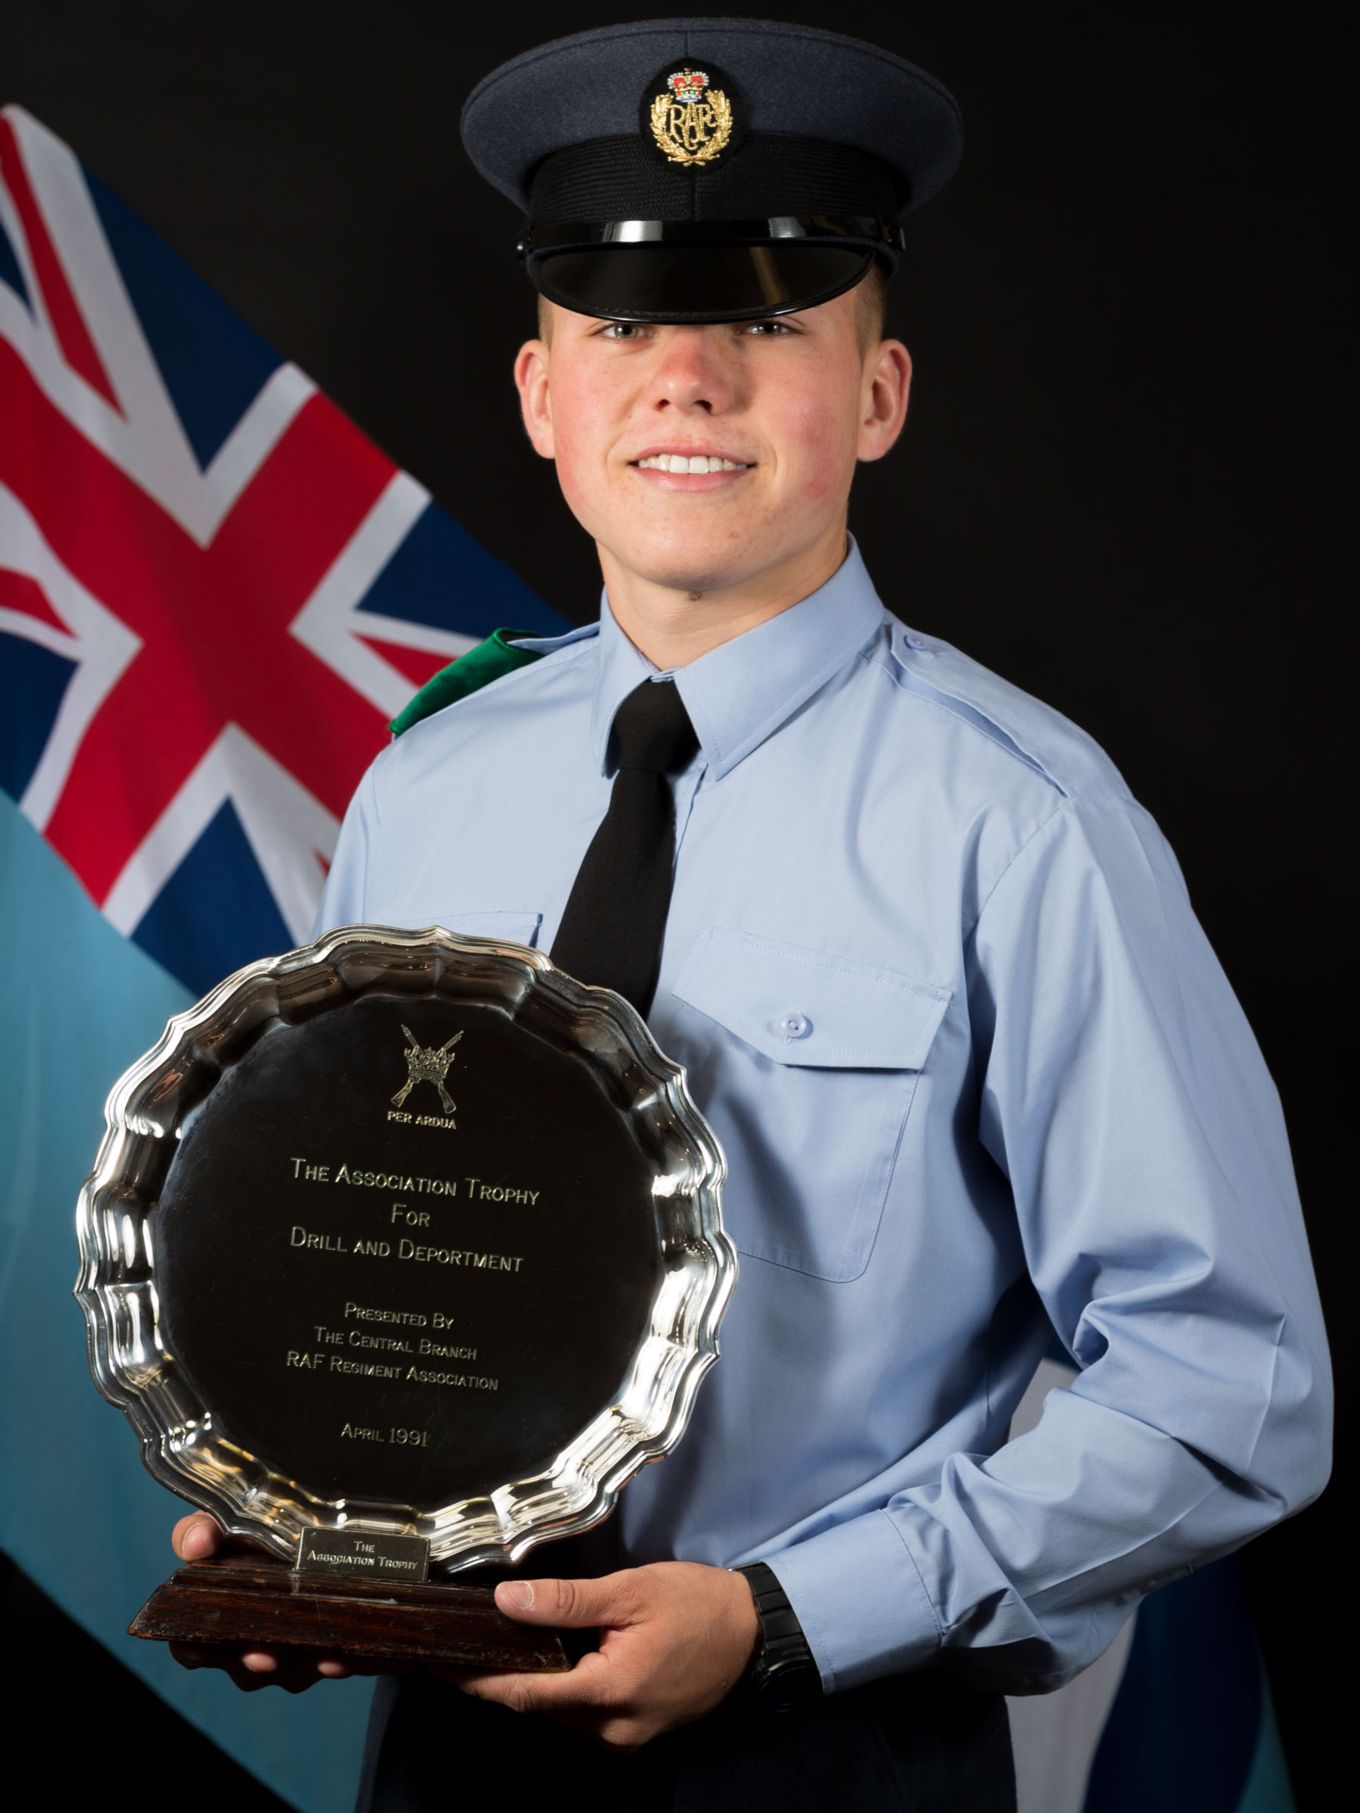 Winner of the The RAF Regt Association Trophy for Drill and Deportment LAC Thresh 